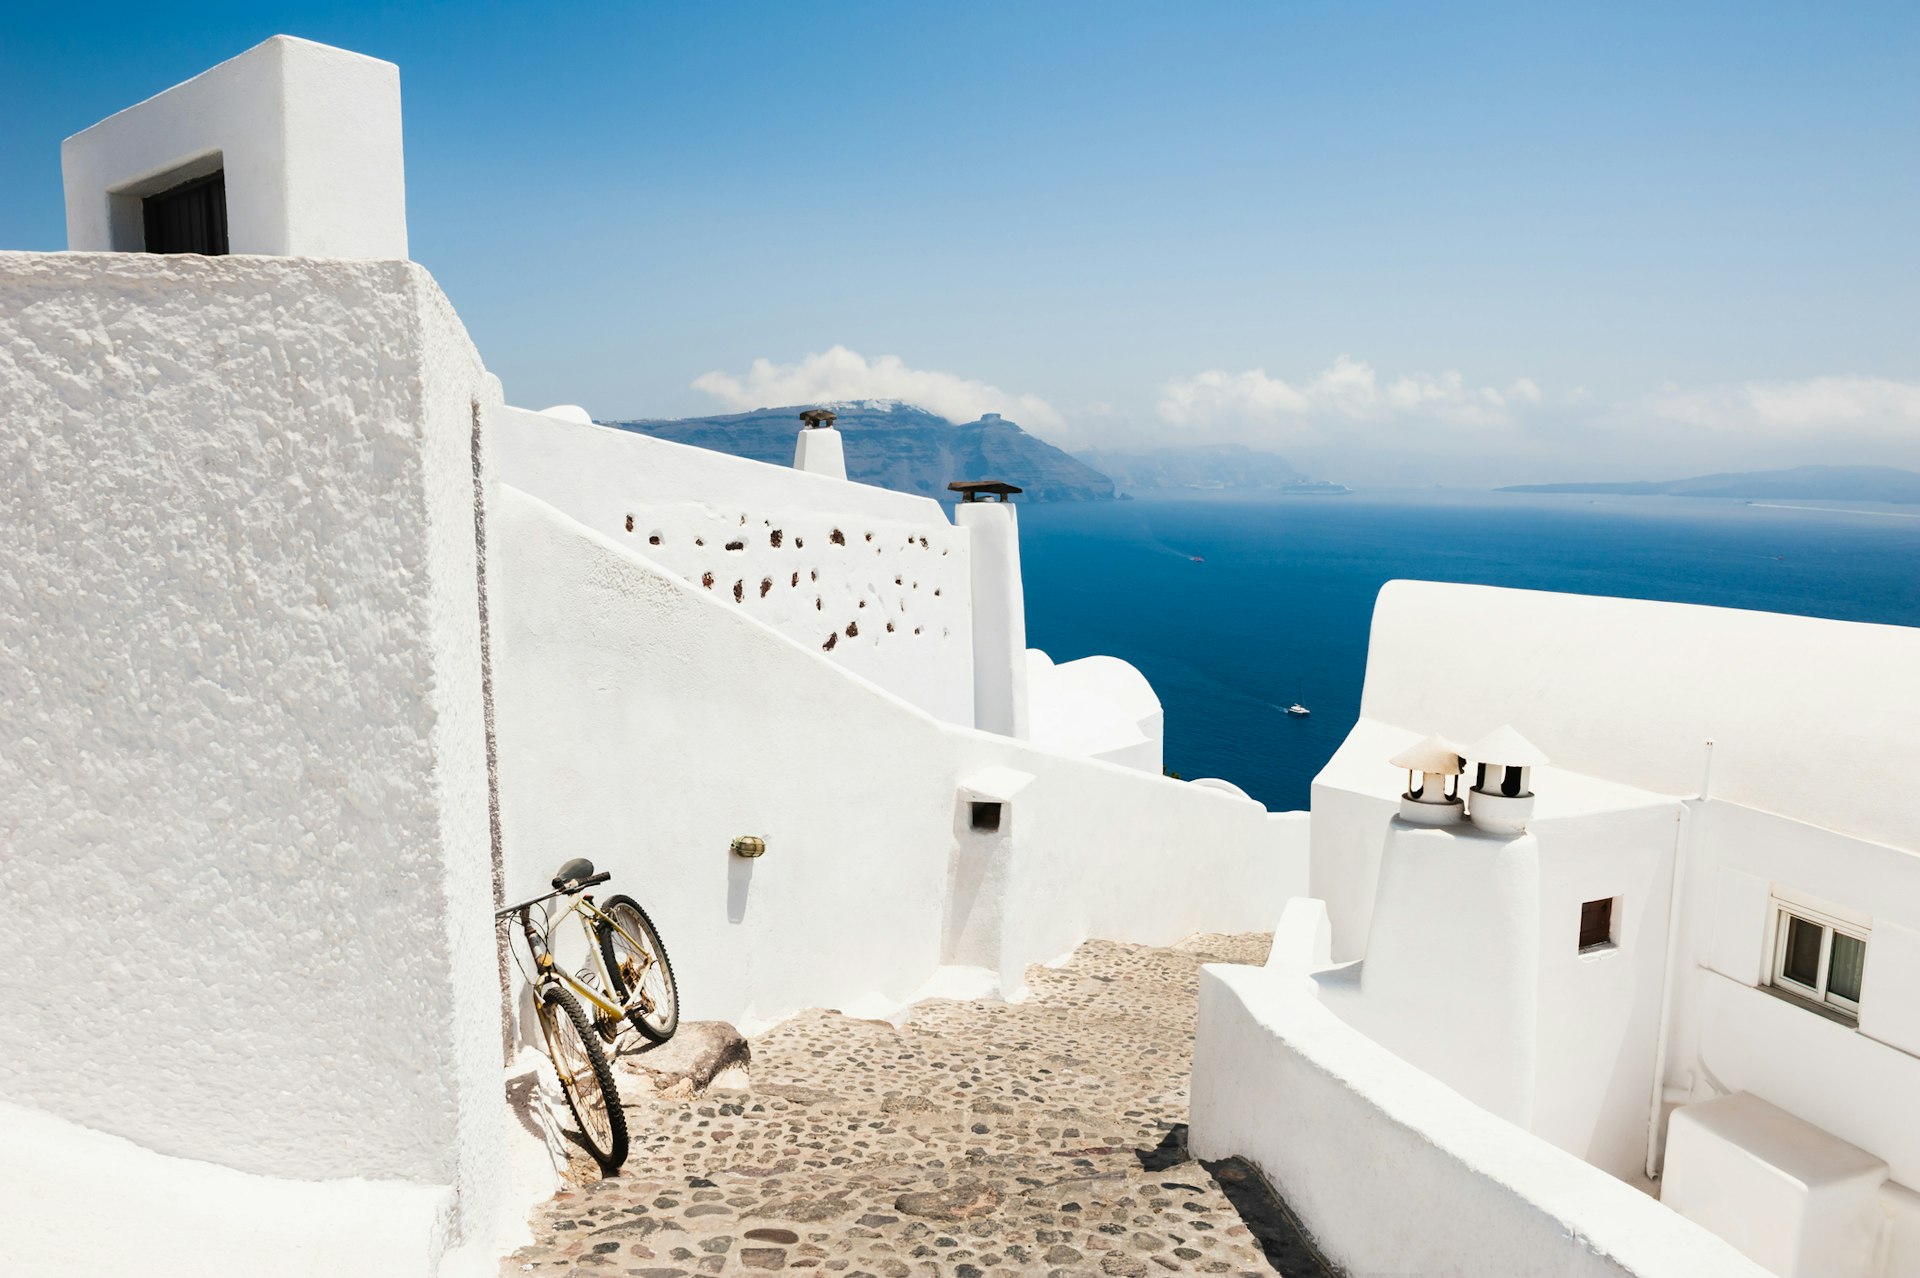 A lone bicycle resting against a whitewashed wall in Santorini, Greece